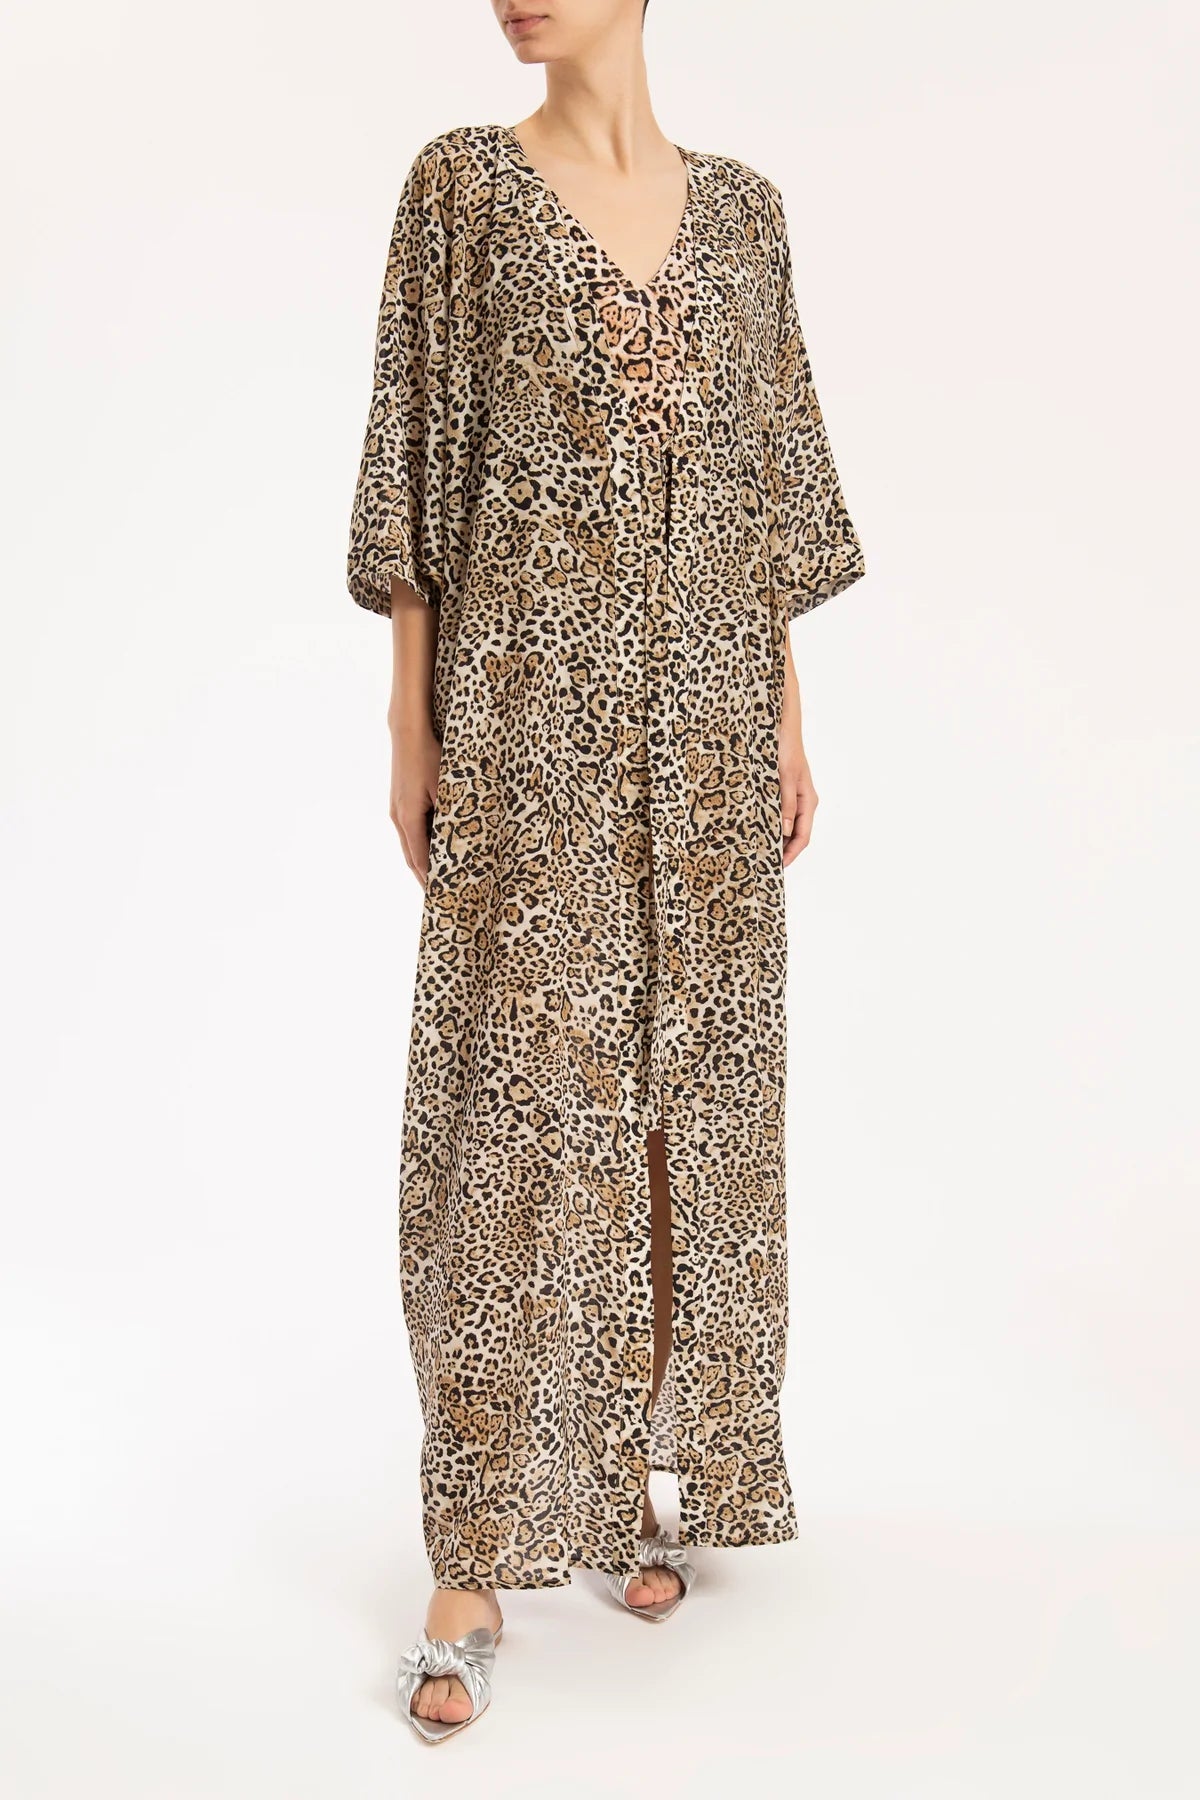 Leopard Long Robe With Knot